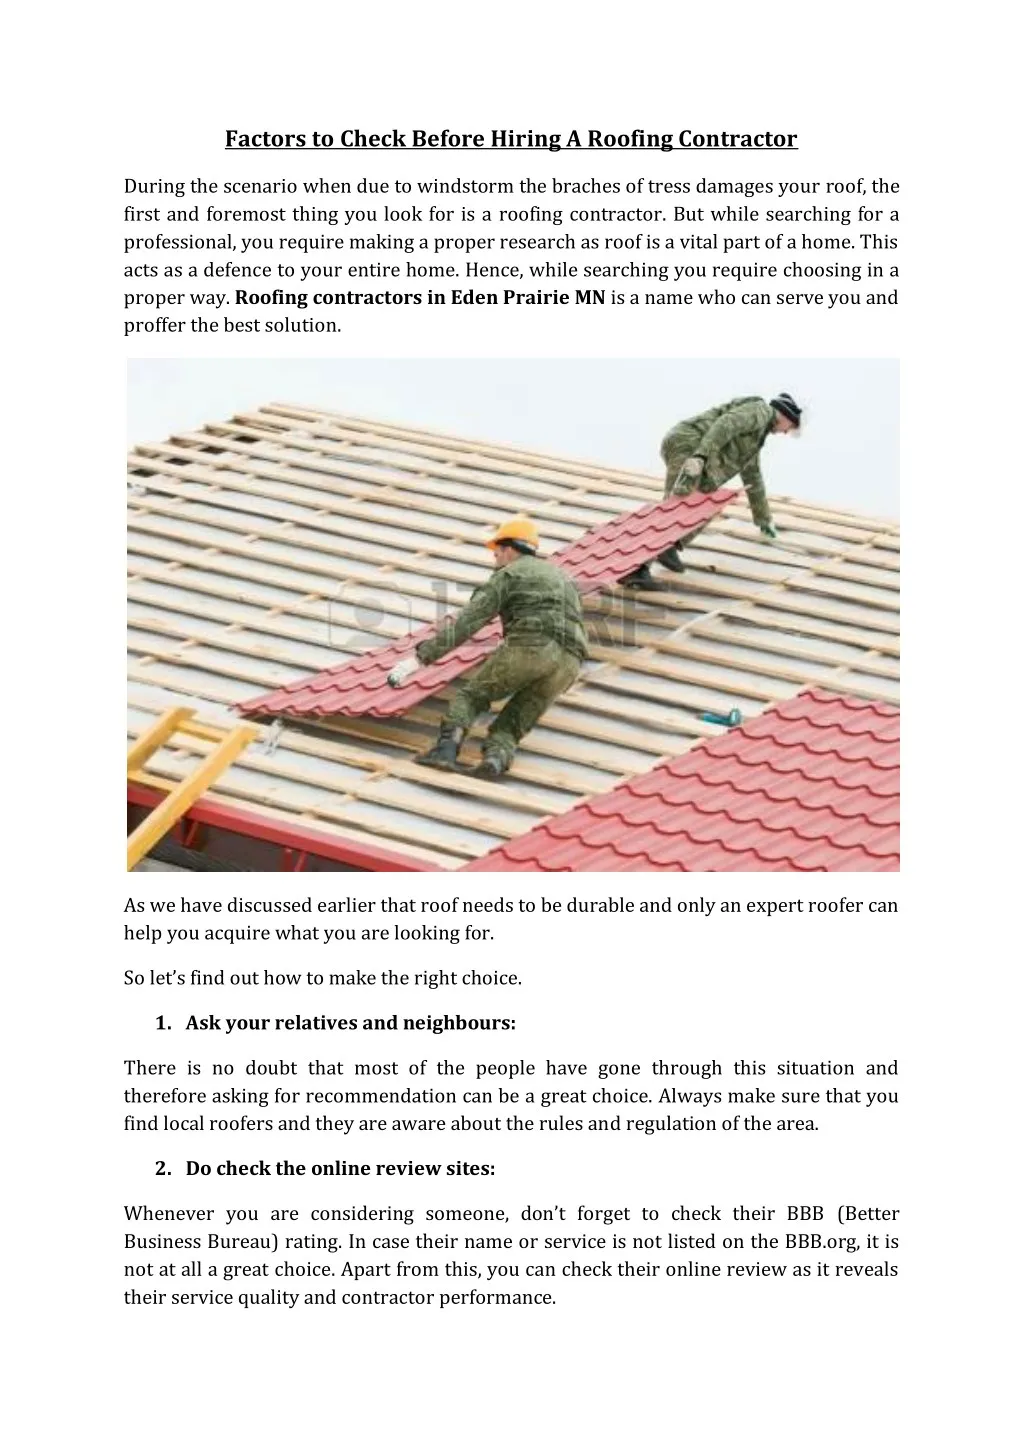 factors to check before hiring a roofing